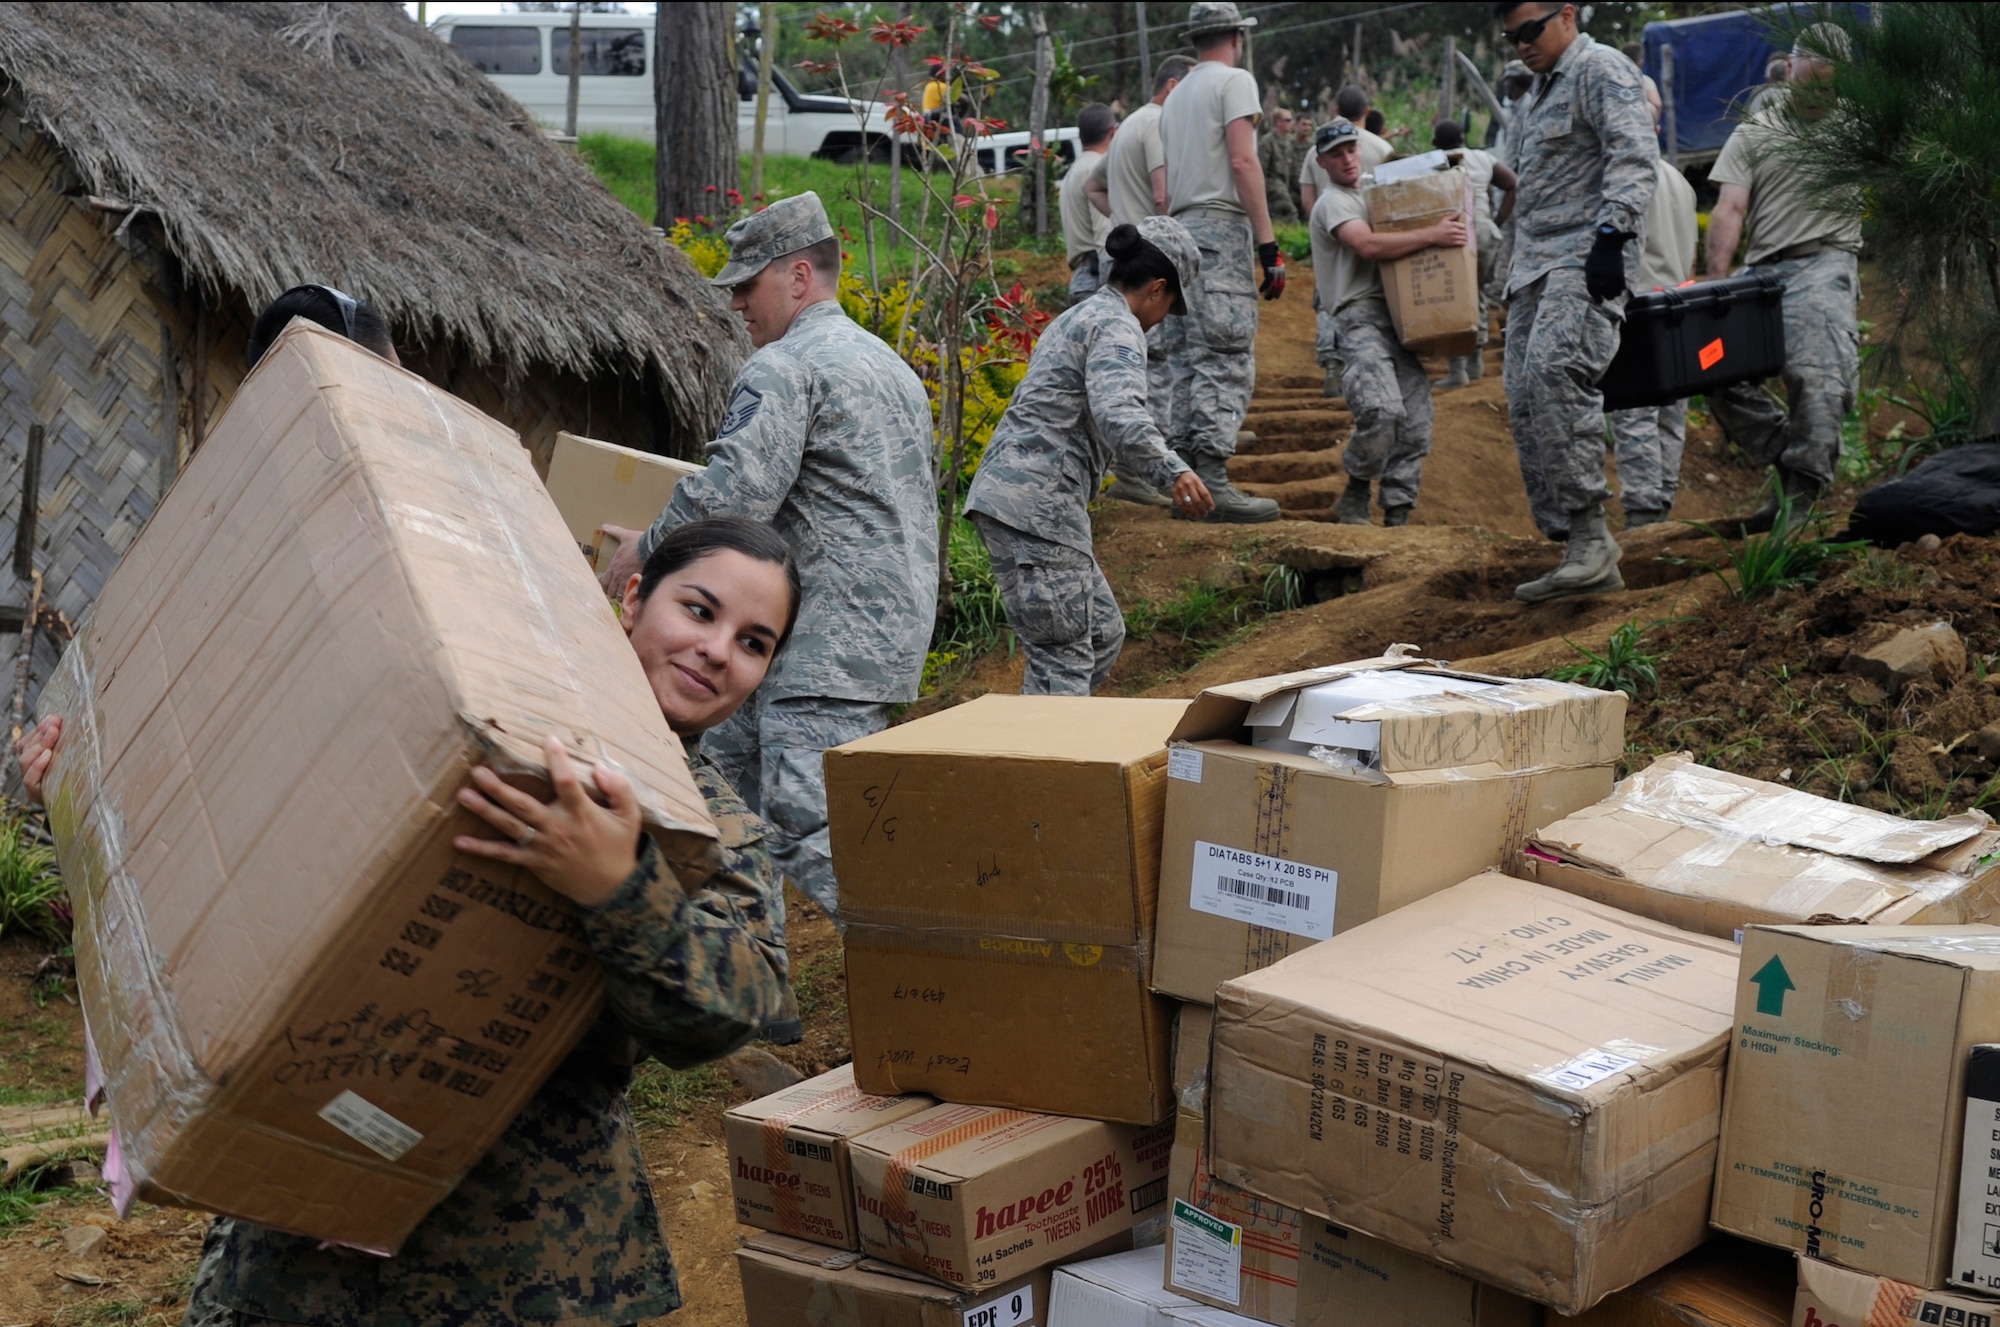 Marine Corps Hospital Corpsman Melissa Irvin, a 1st Dental Battalion dental corpsman from Camp Pendleton, Calif., carries a box of medical supplies to Unggai Primary School, where medical professionals are setting up during Pacific Angel 15-4 at Eastern Highlands, Papua New Guinea, May 29, 2015. Efforts undertaken during Pacific Angel help multilateral militaries in the Pacific improve and build relationships across a wide spectrum of civic operations, which bolsters each nation’s capacity to respond and support future humanitarian assistance and disaster relief operations. (U.S. Air Force photo/Staff Sgt. Marcus Morris)